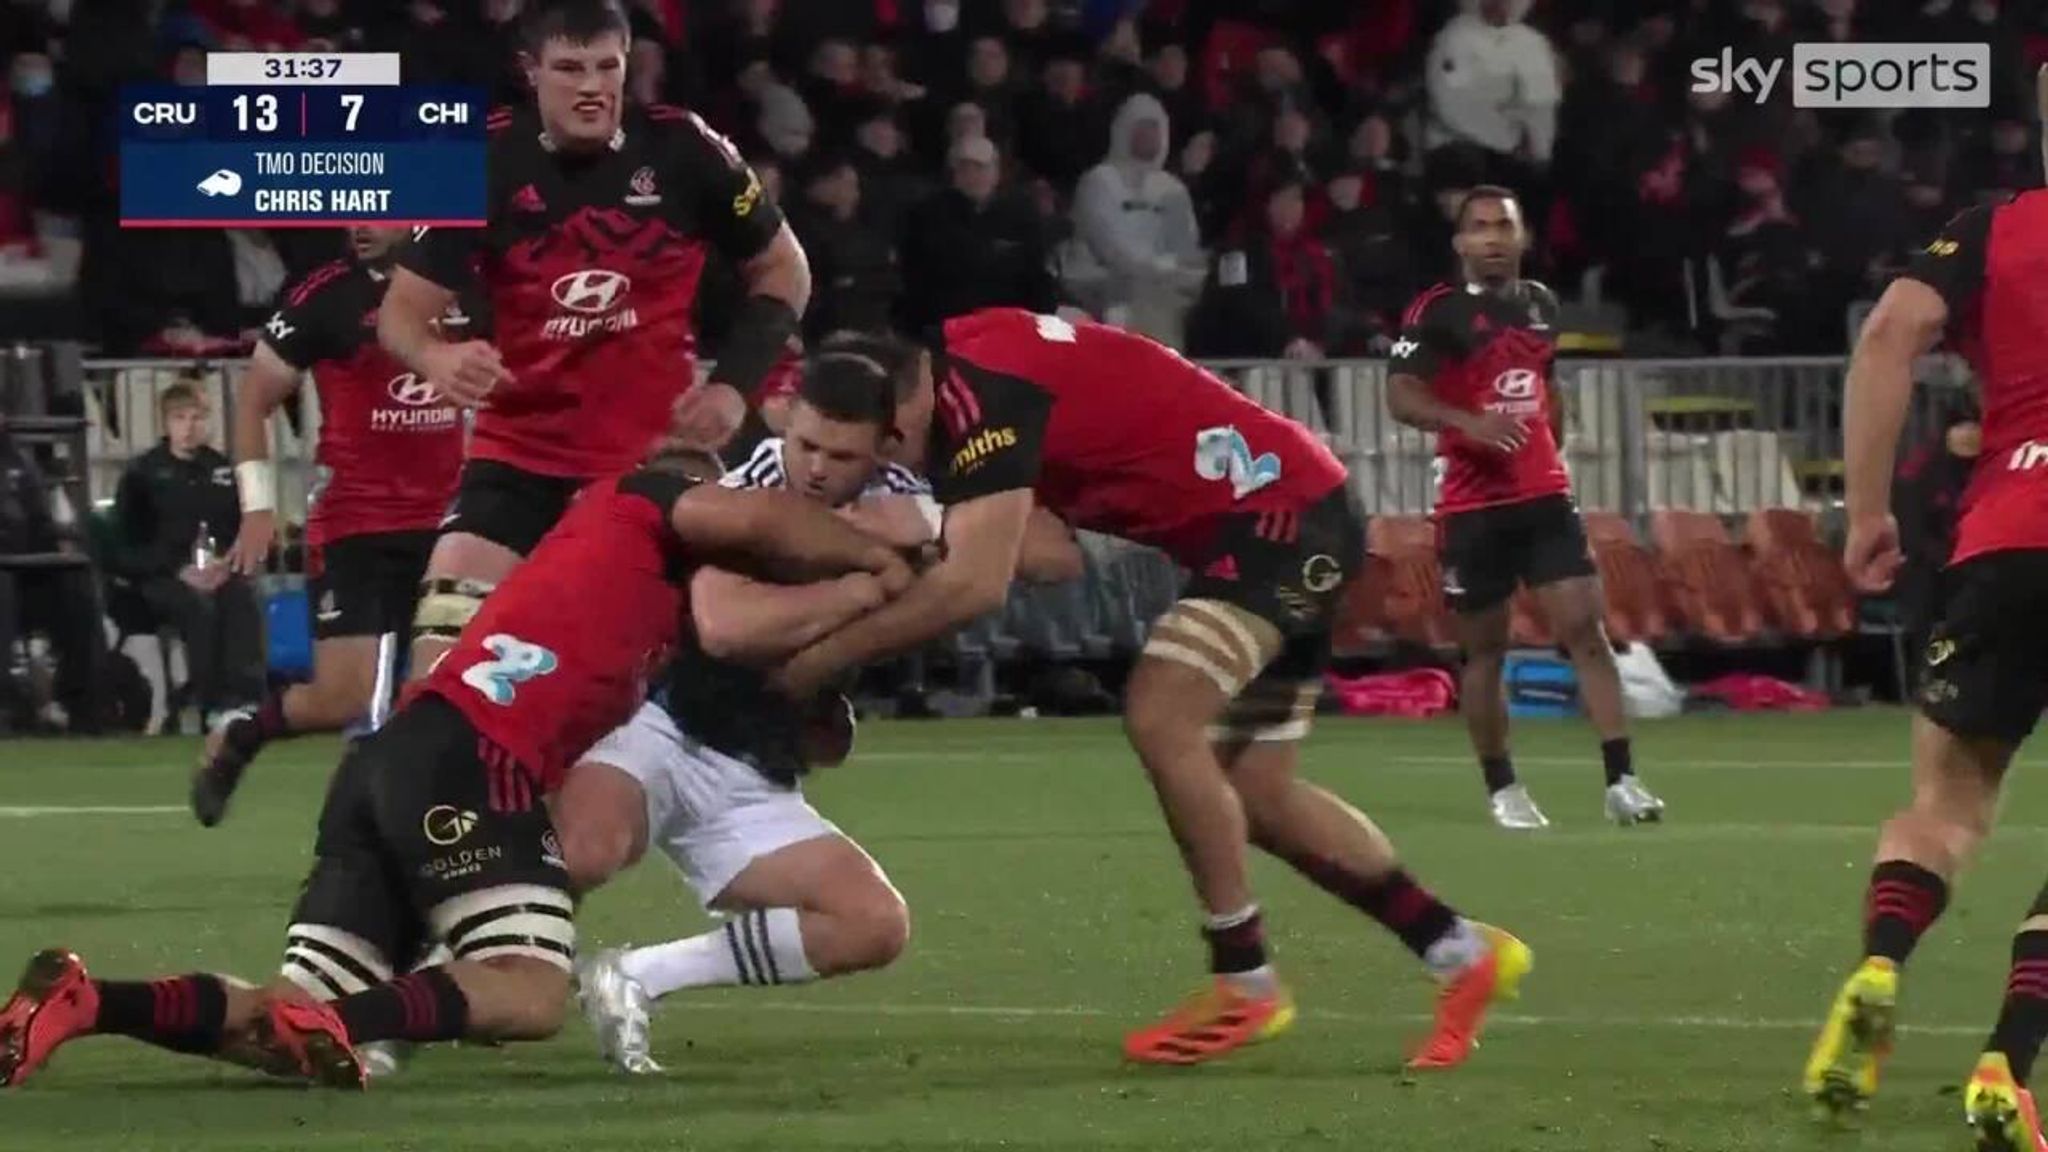 Crusaders 20-7 Chiefs Video Watch TV Show Sky Sports